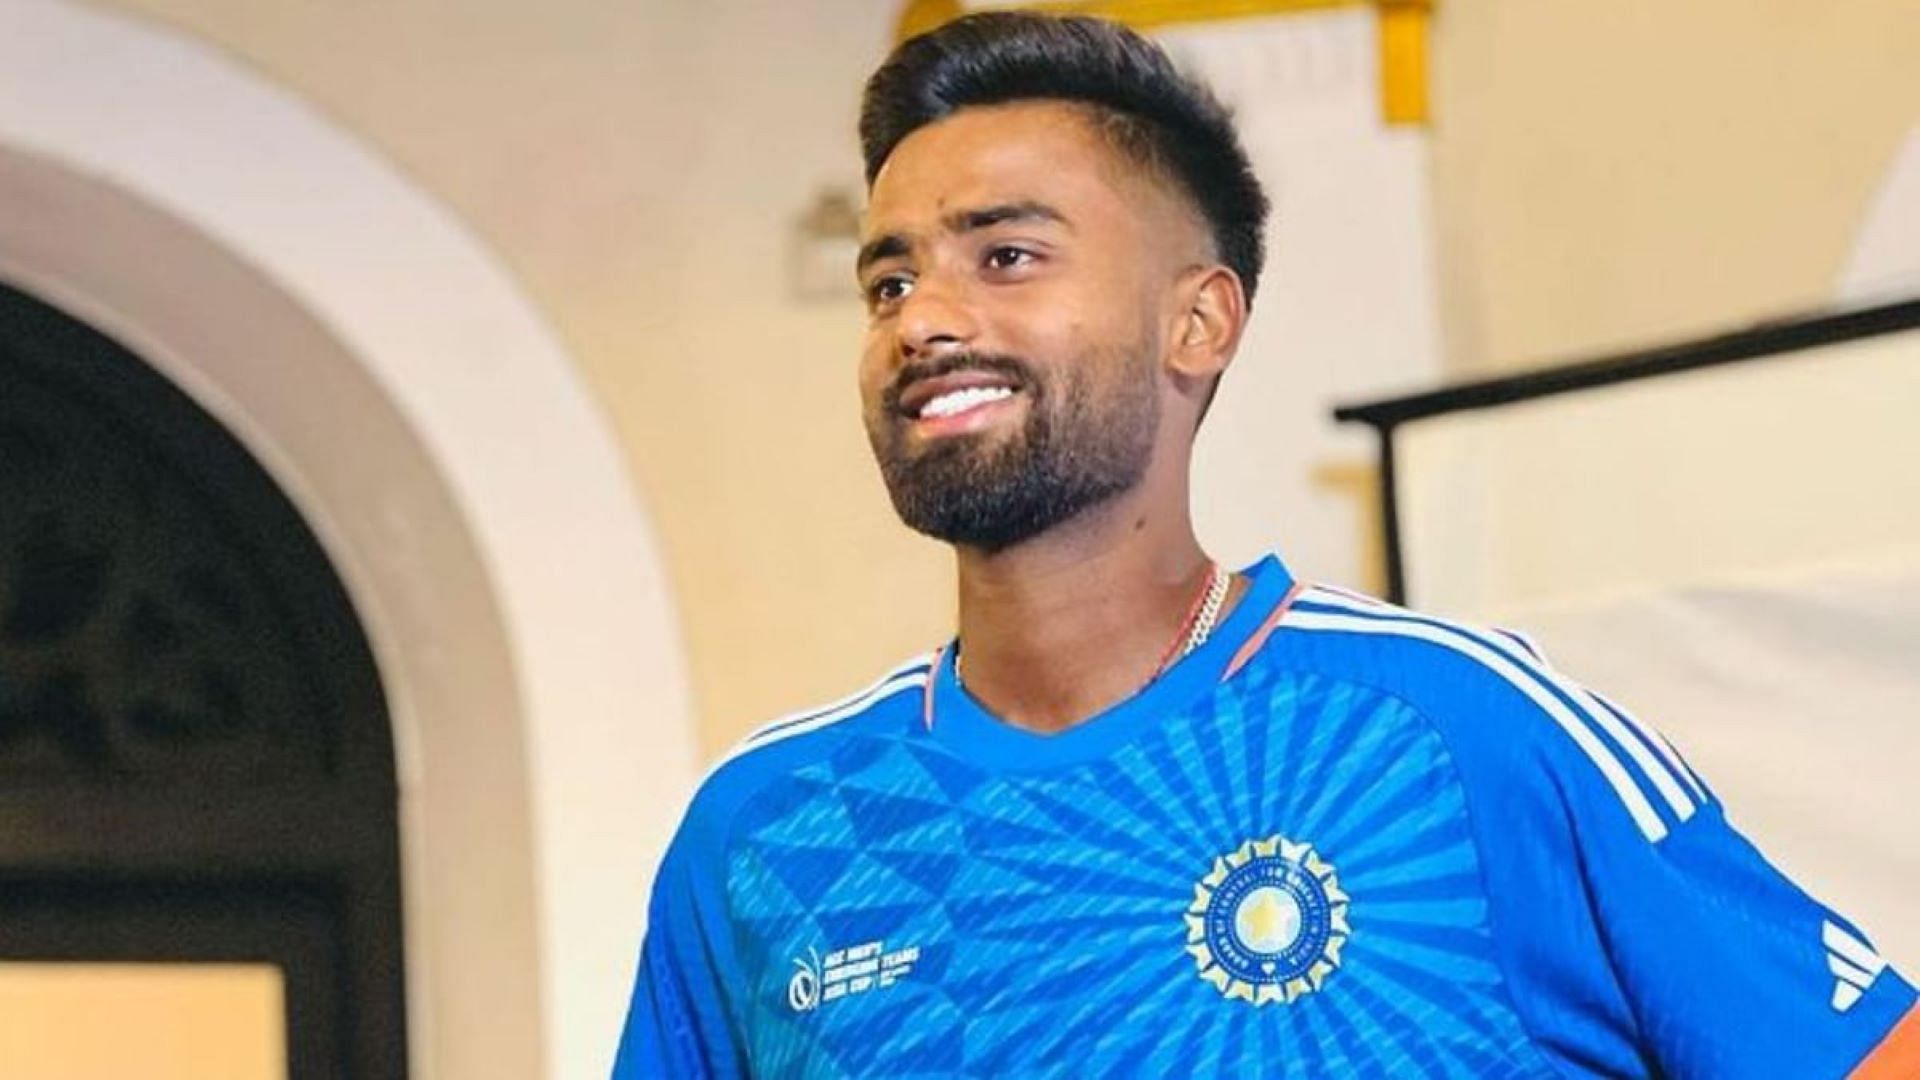 Manav Suthar has starred for India A in the ACC Men